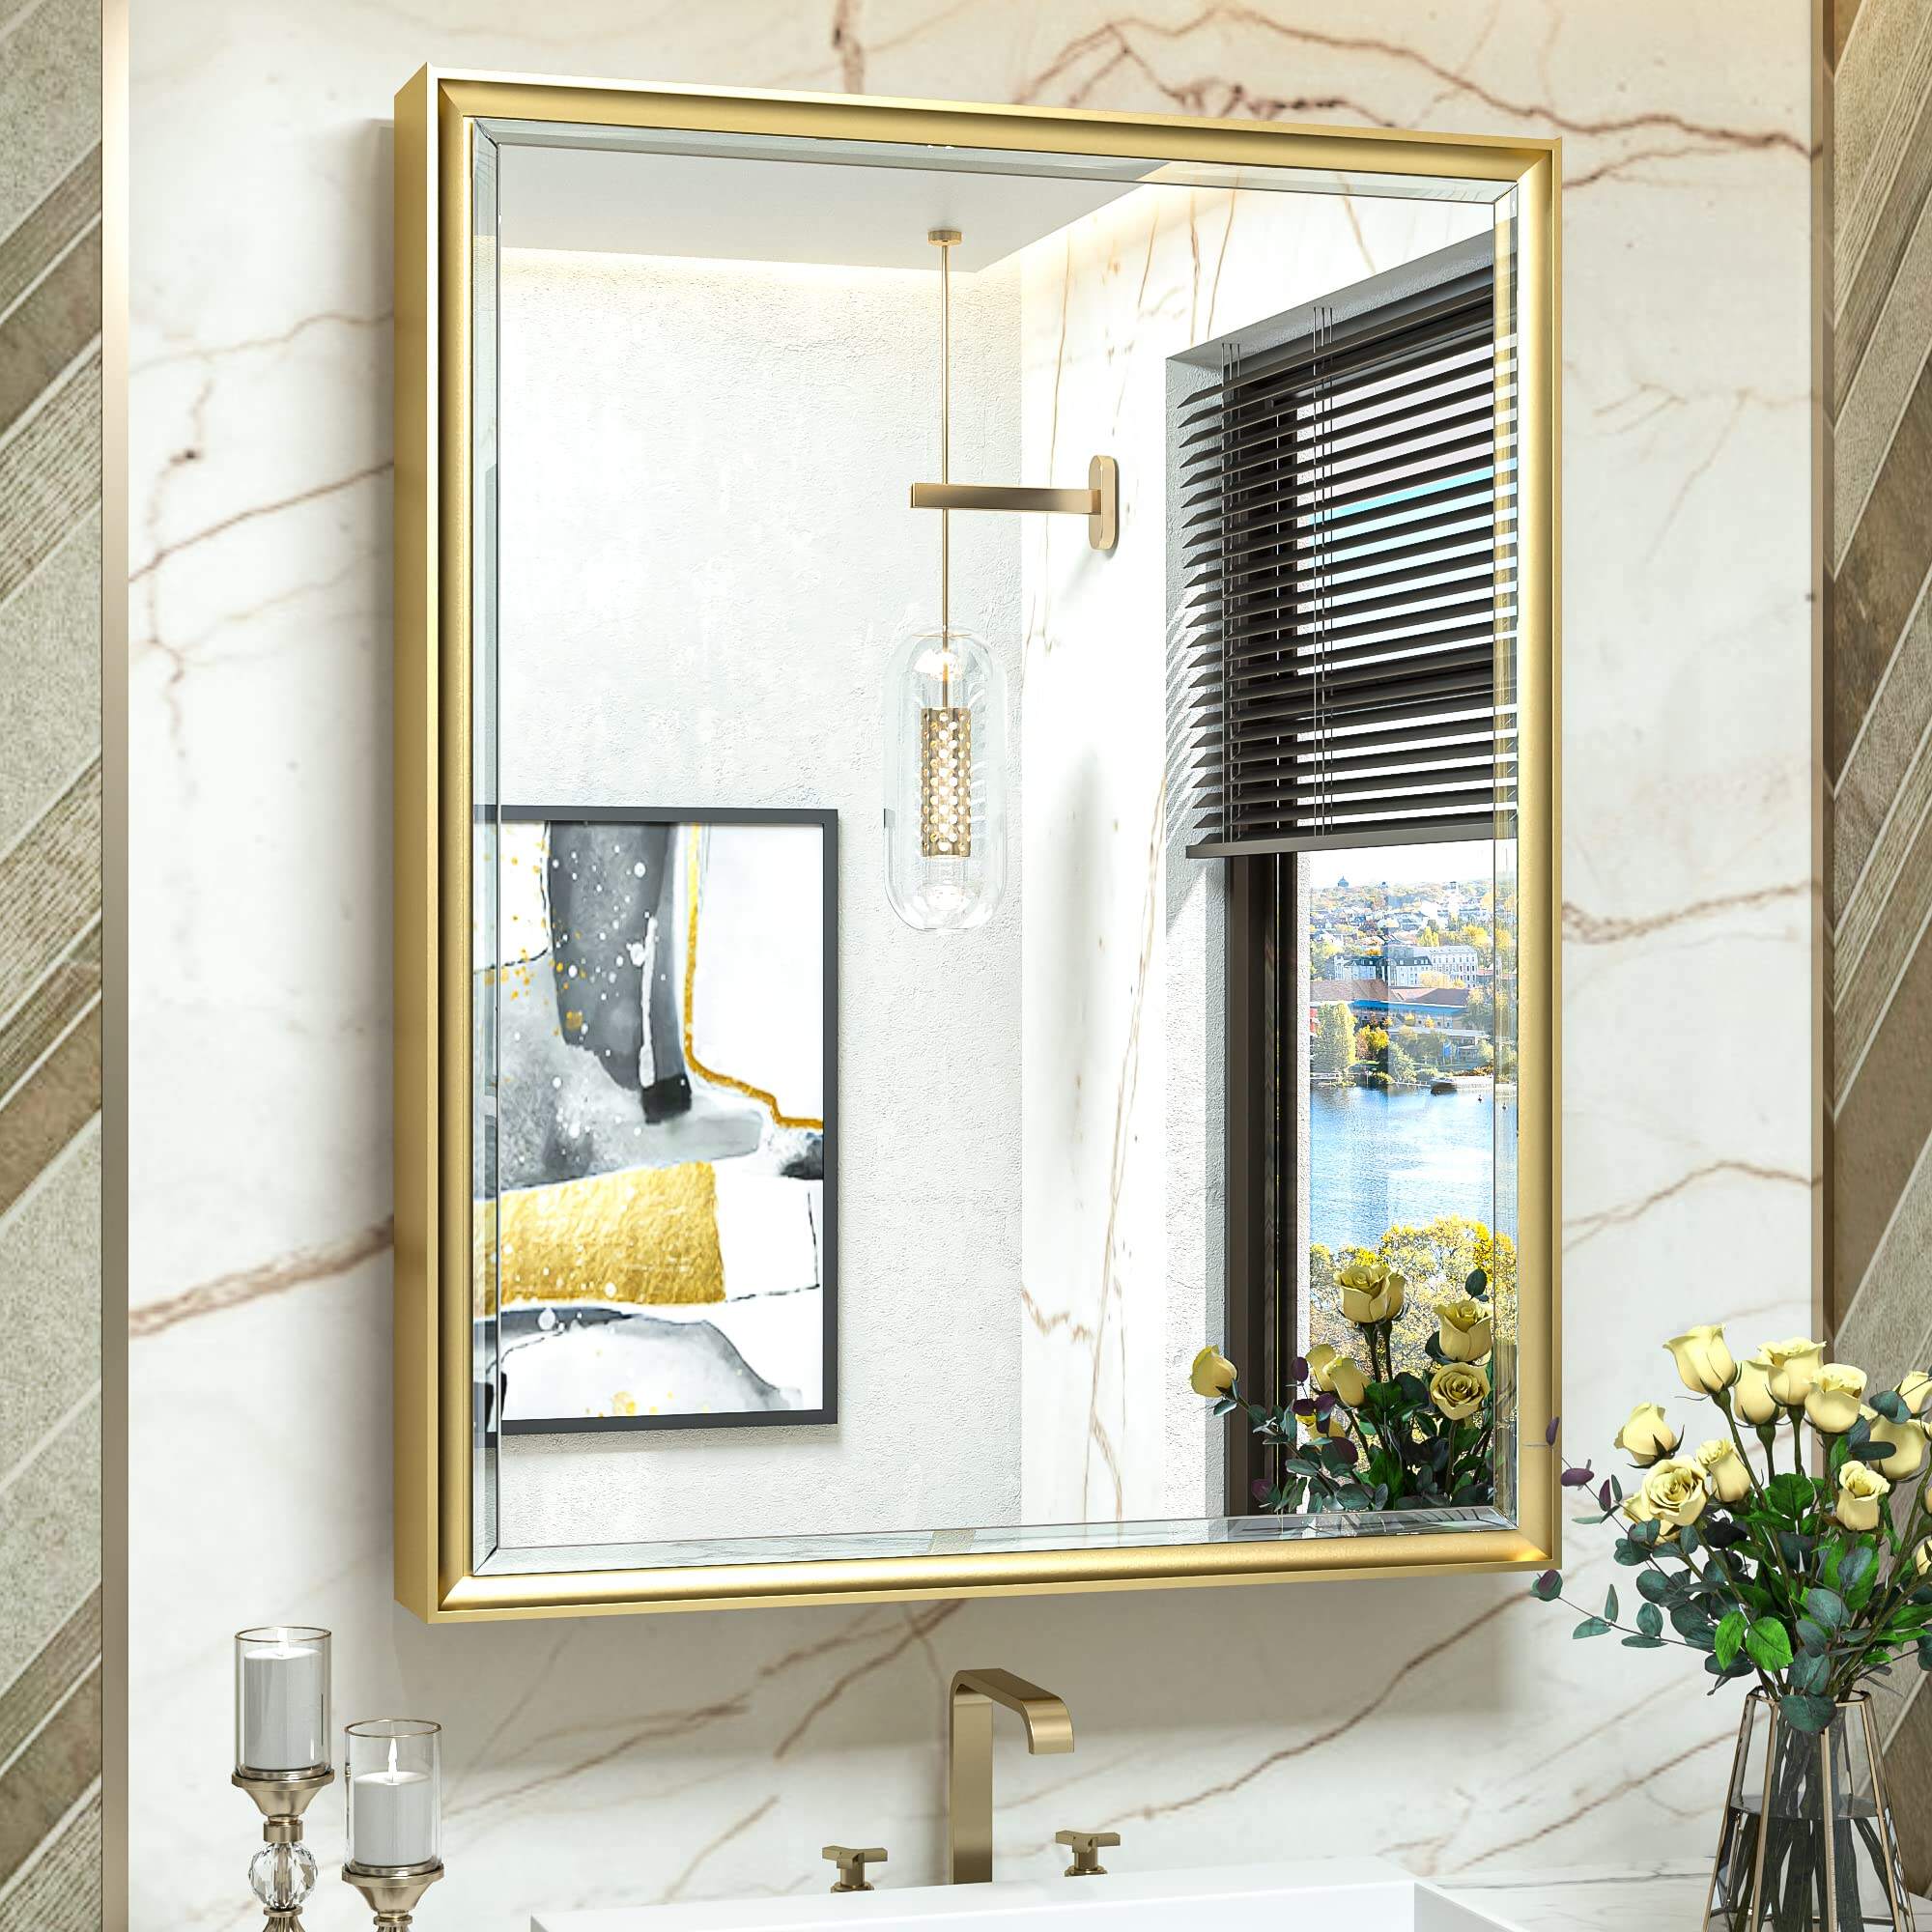 Foshan Haohan Smart Home Co., Ltd. 24x30 Recessed Medicine Cabinet Bathroom Vanity Mirror Gold Metal Framed Surface Wall Mounted with Aluminum Alloy Beveled Edges Design 1 Door for Modern Farmhouse